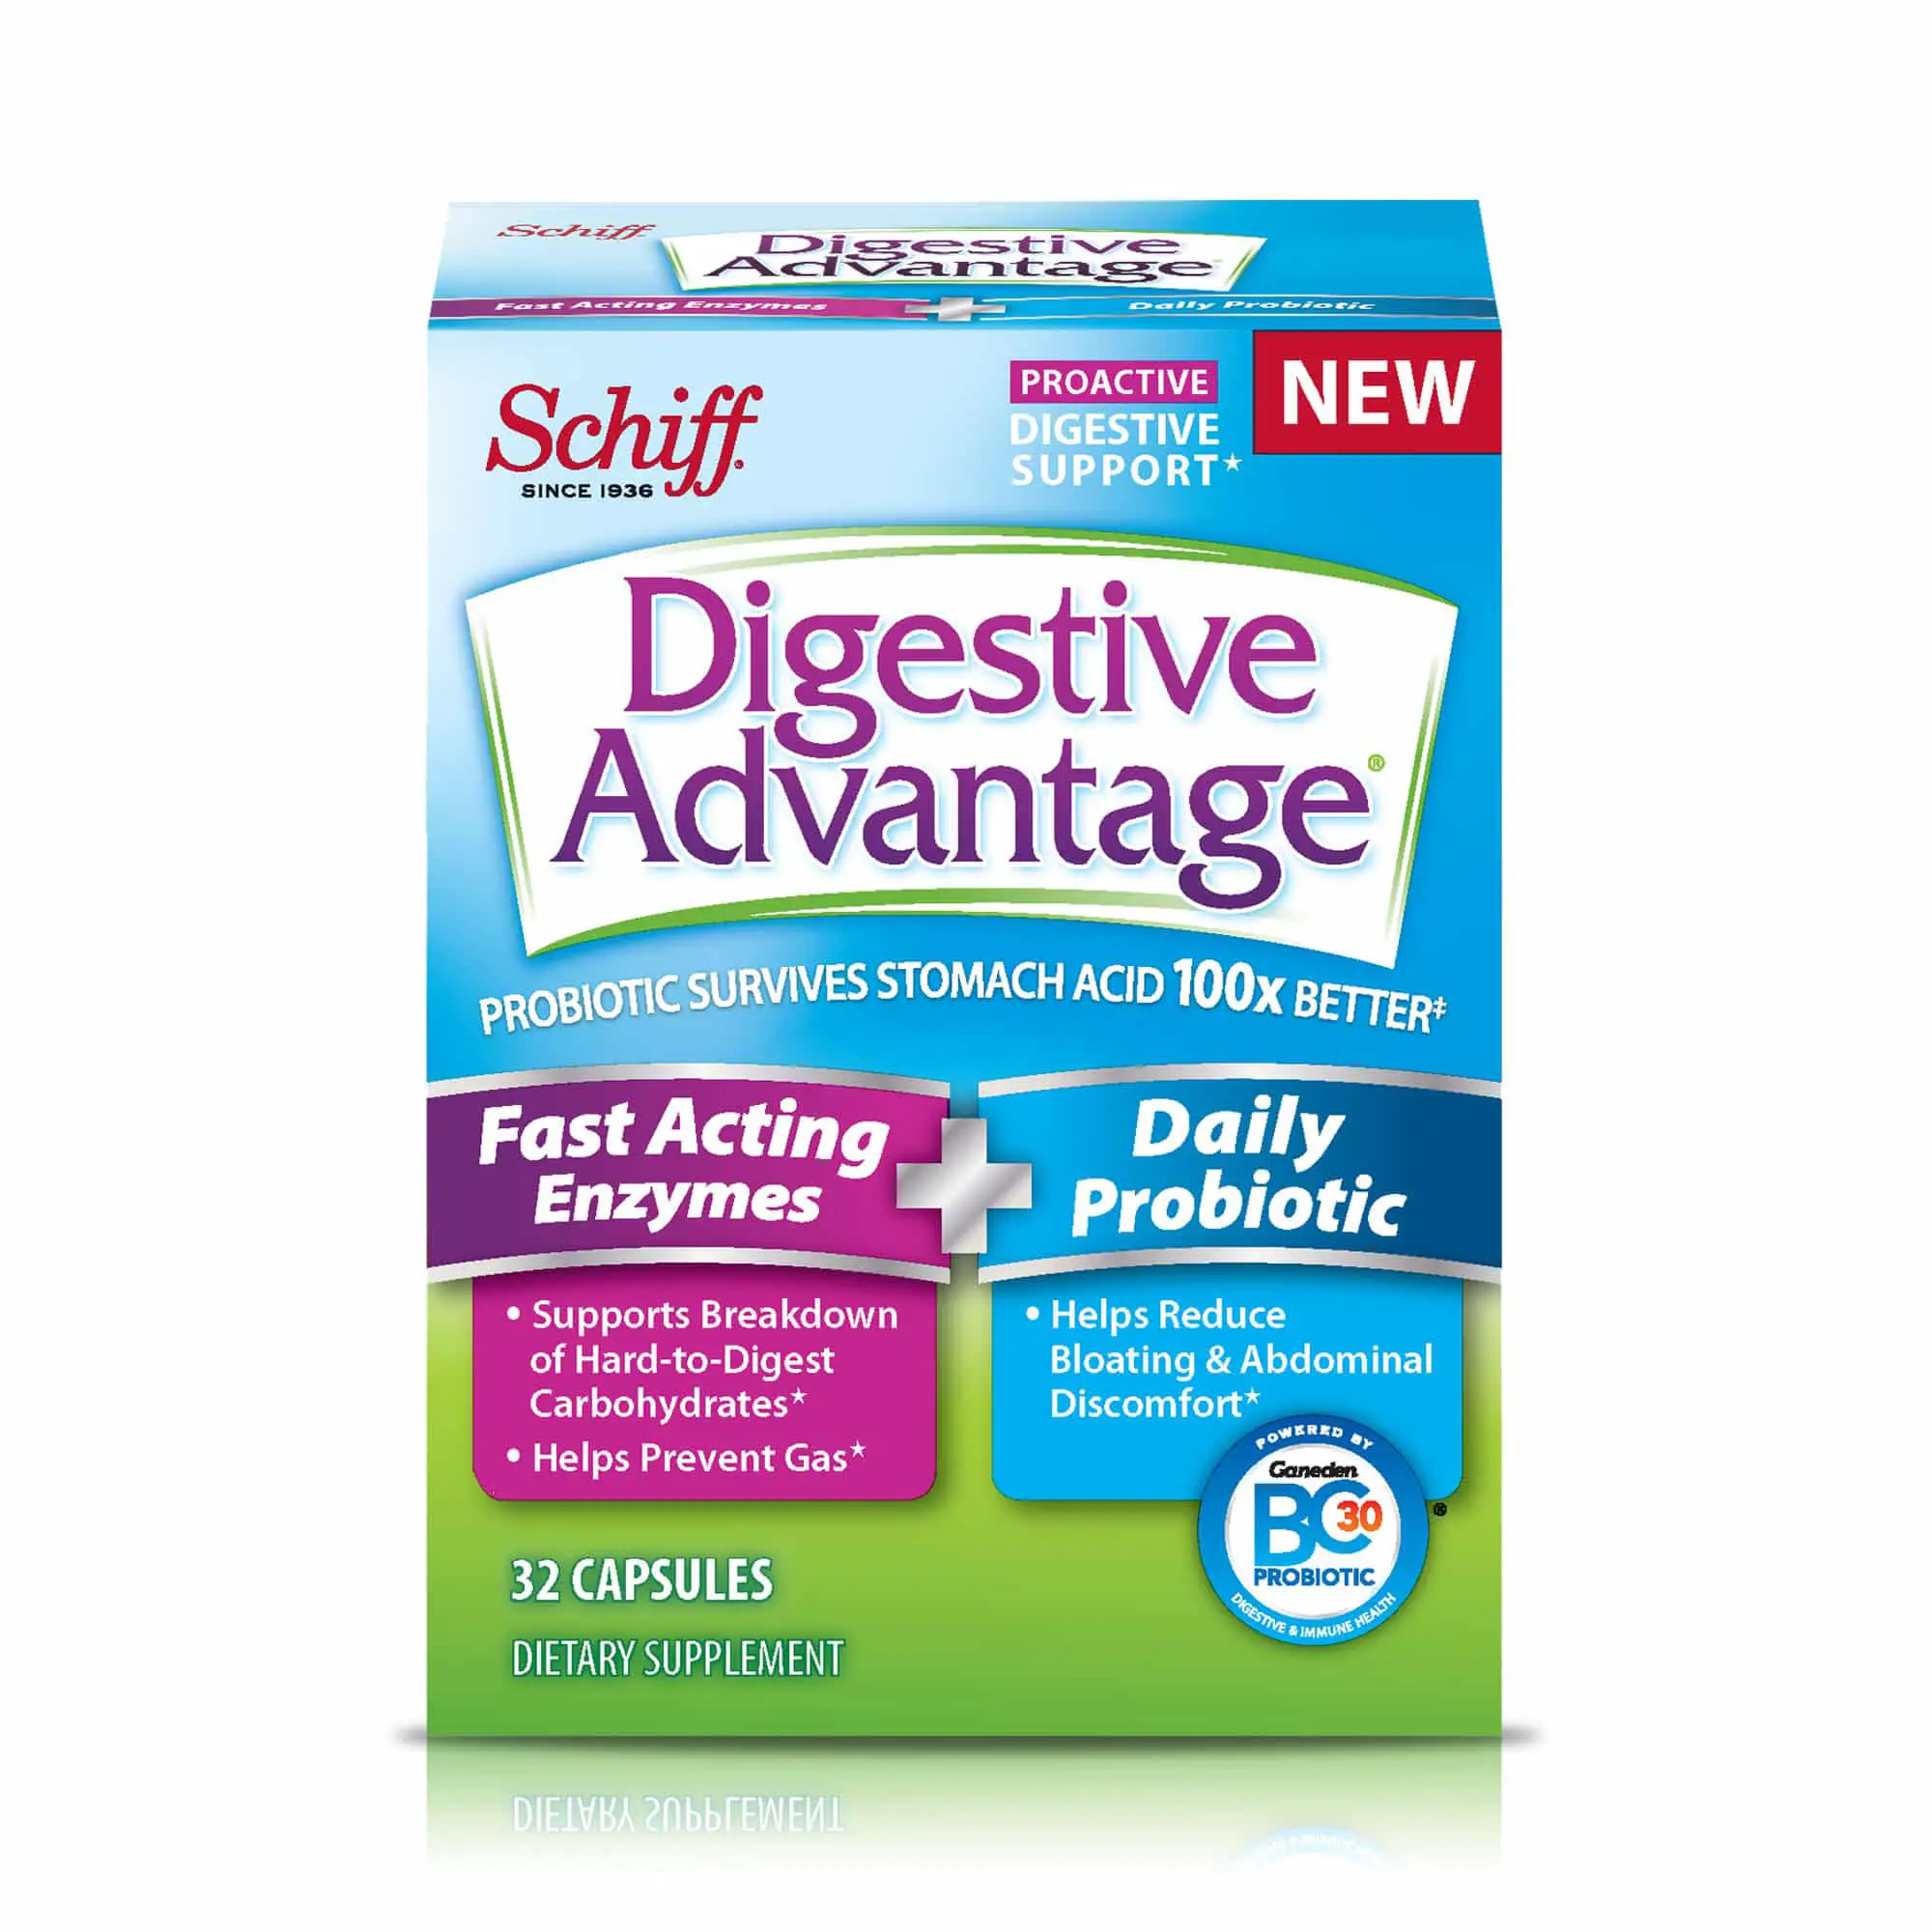 Digestive Advantage Fast Acting Enzymes Plus Daily Probiotic